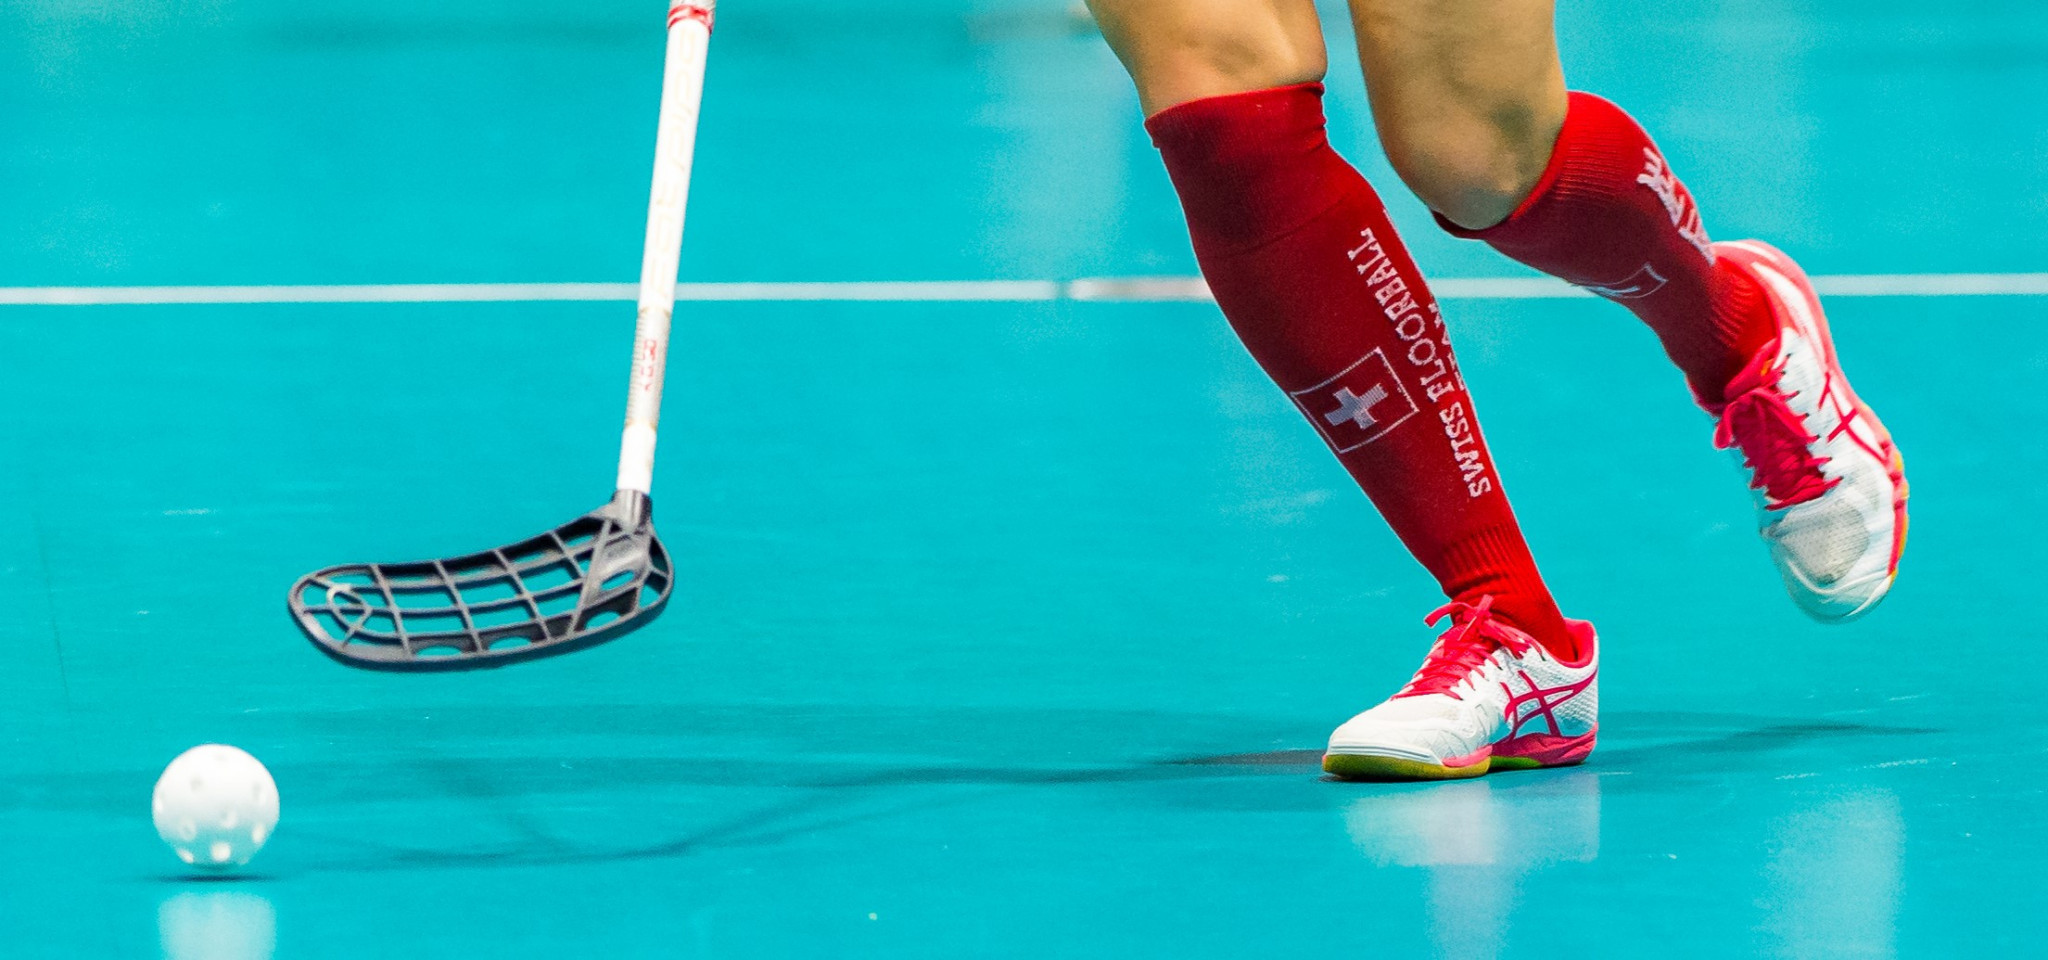 Women's Under-19 World Floorball Championship likely to be moved to September